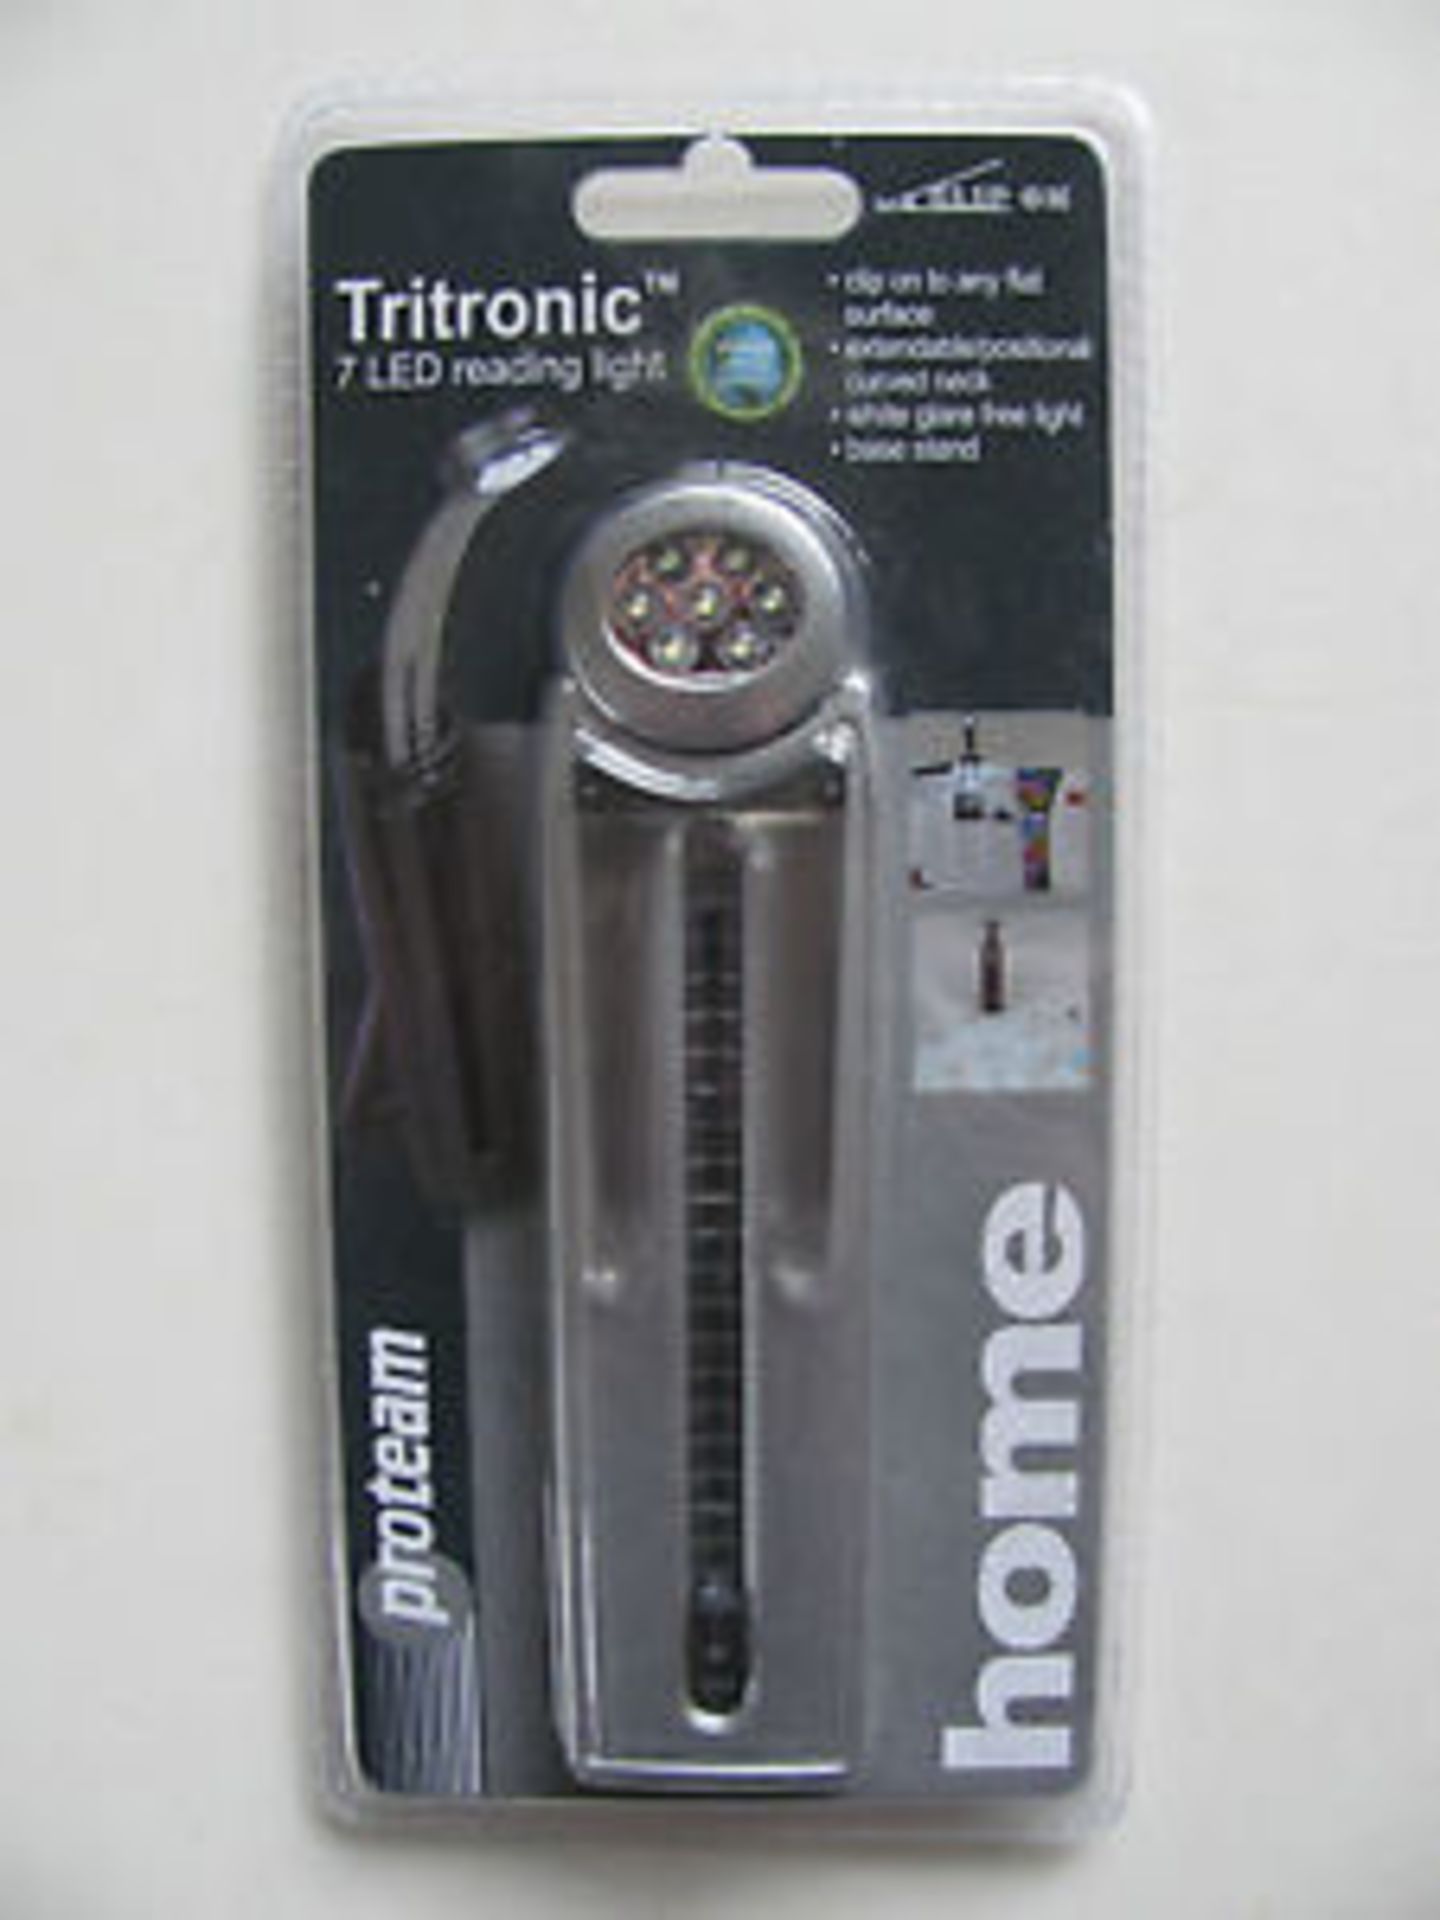 V *TRADE QTY* Brand New Tritronic 7 LED Reading Light With Clip & Stand X 5 YOUR BID PRICE TO BE - Image 2 of 4